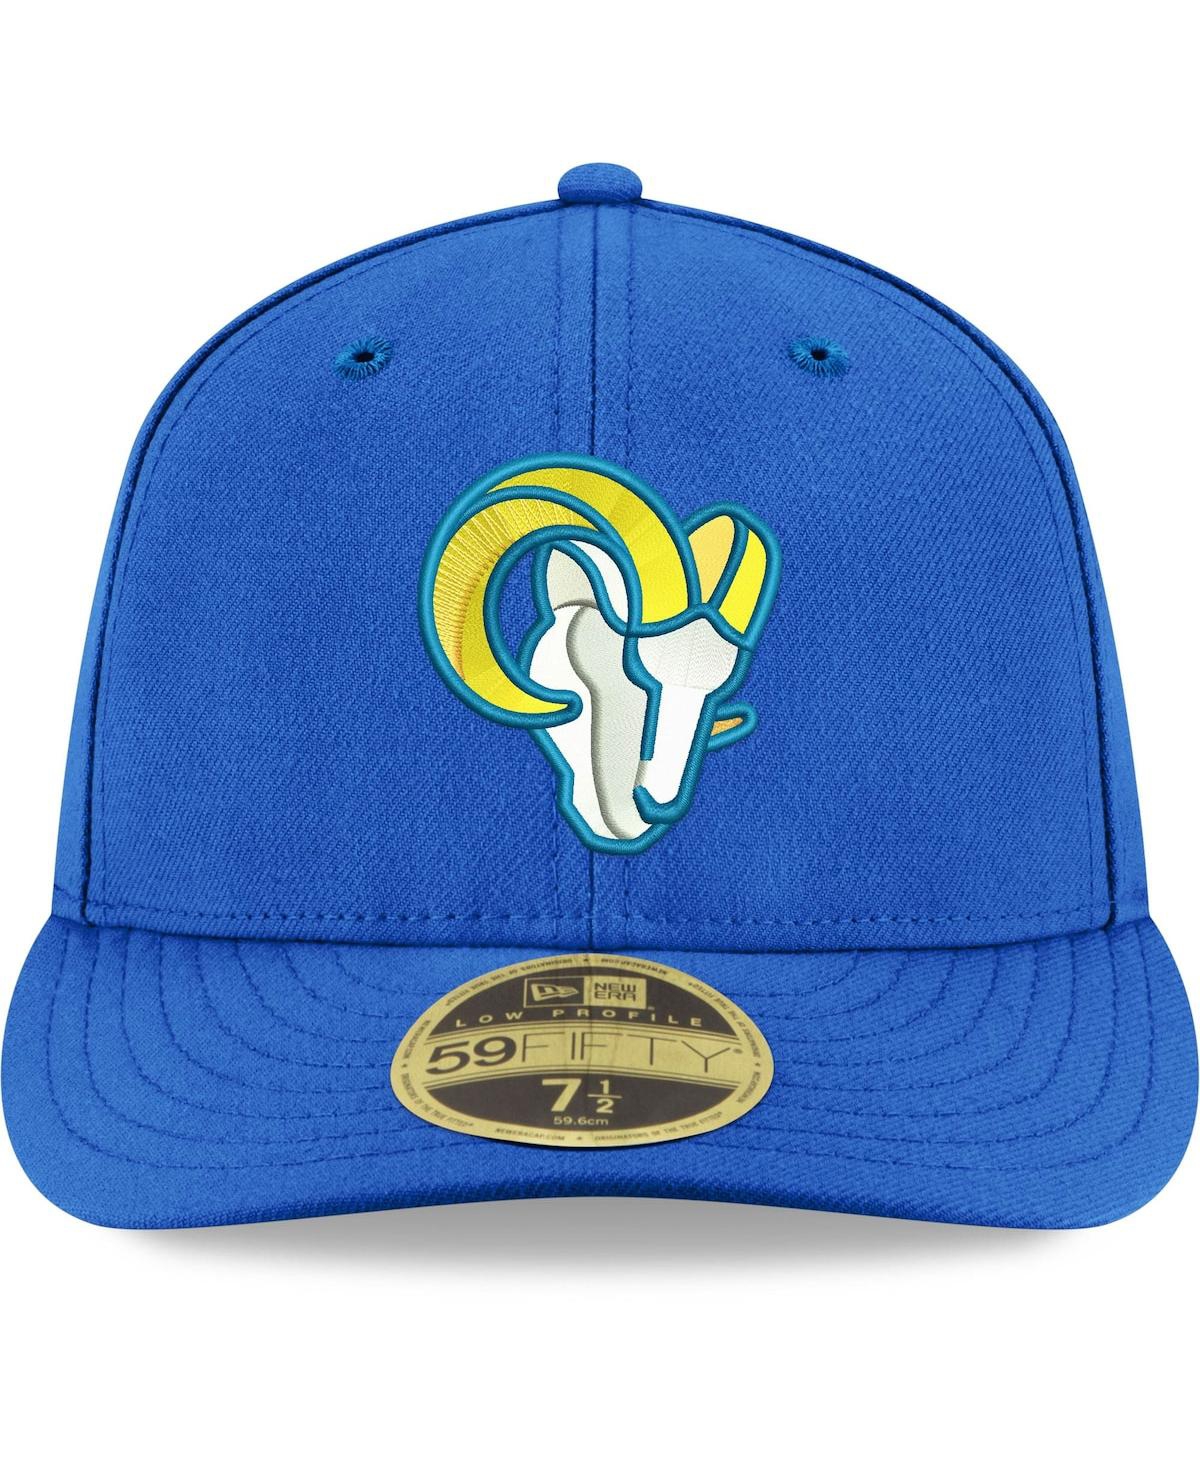 Shop New Era Men's  Royal Los Angeles Rams Omaha Low Profile 59fifty Fitted Team Hat